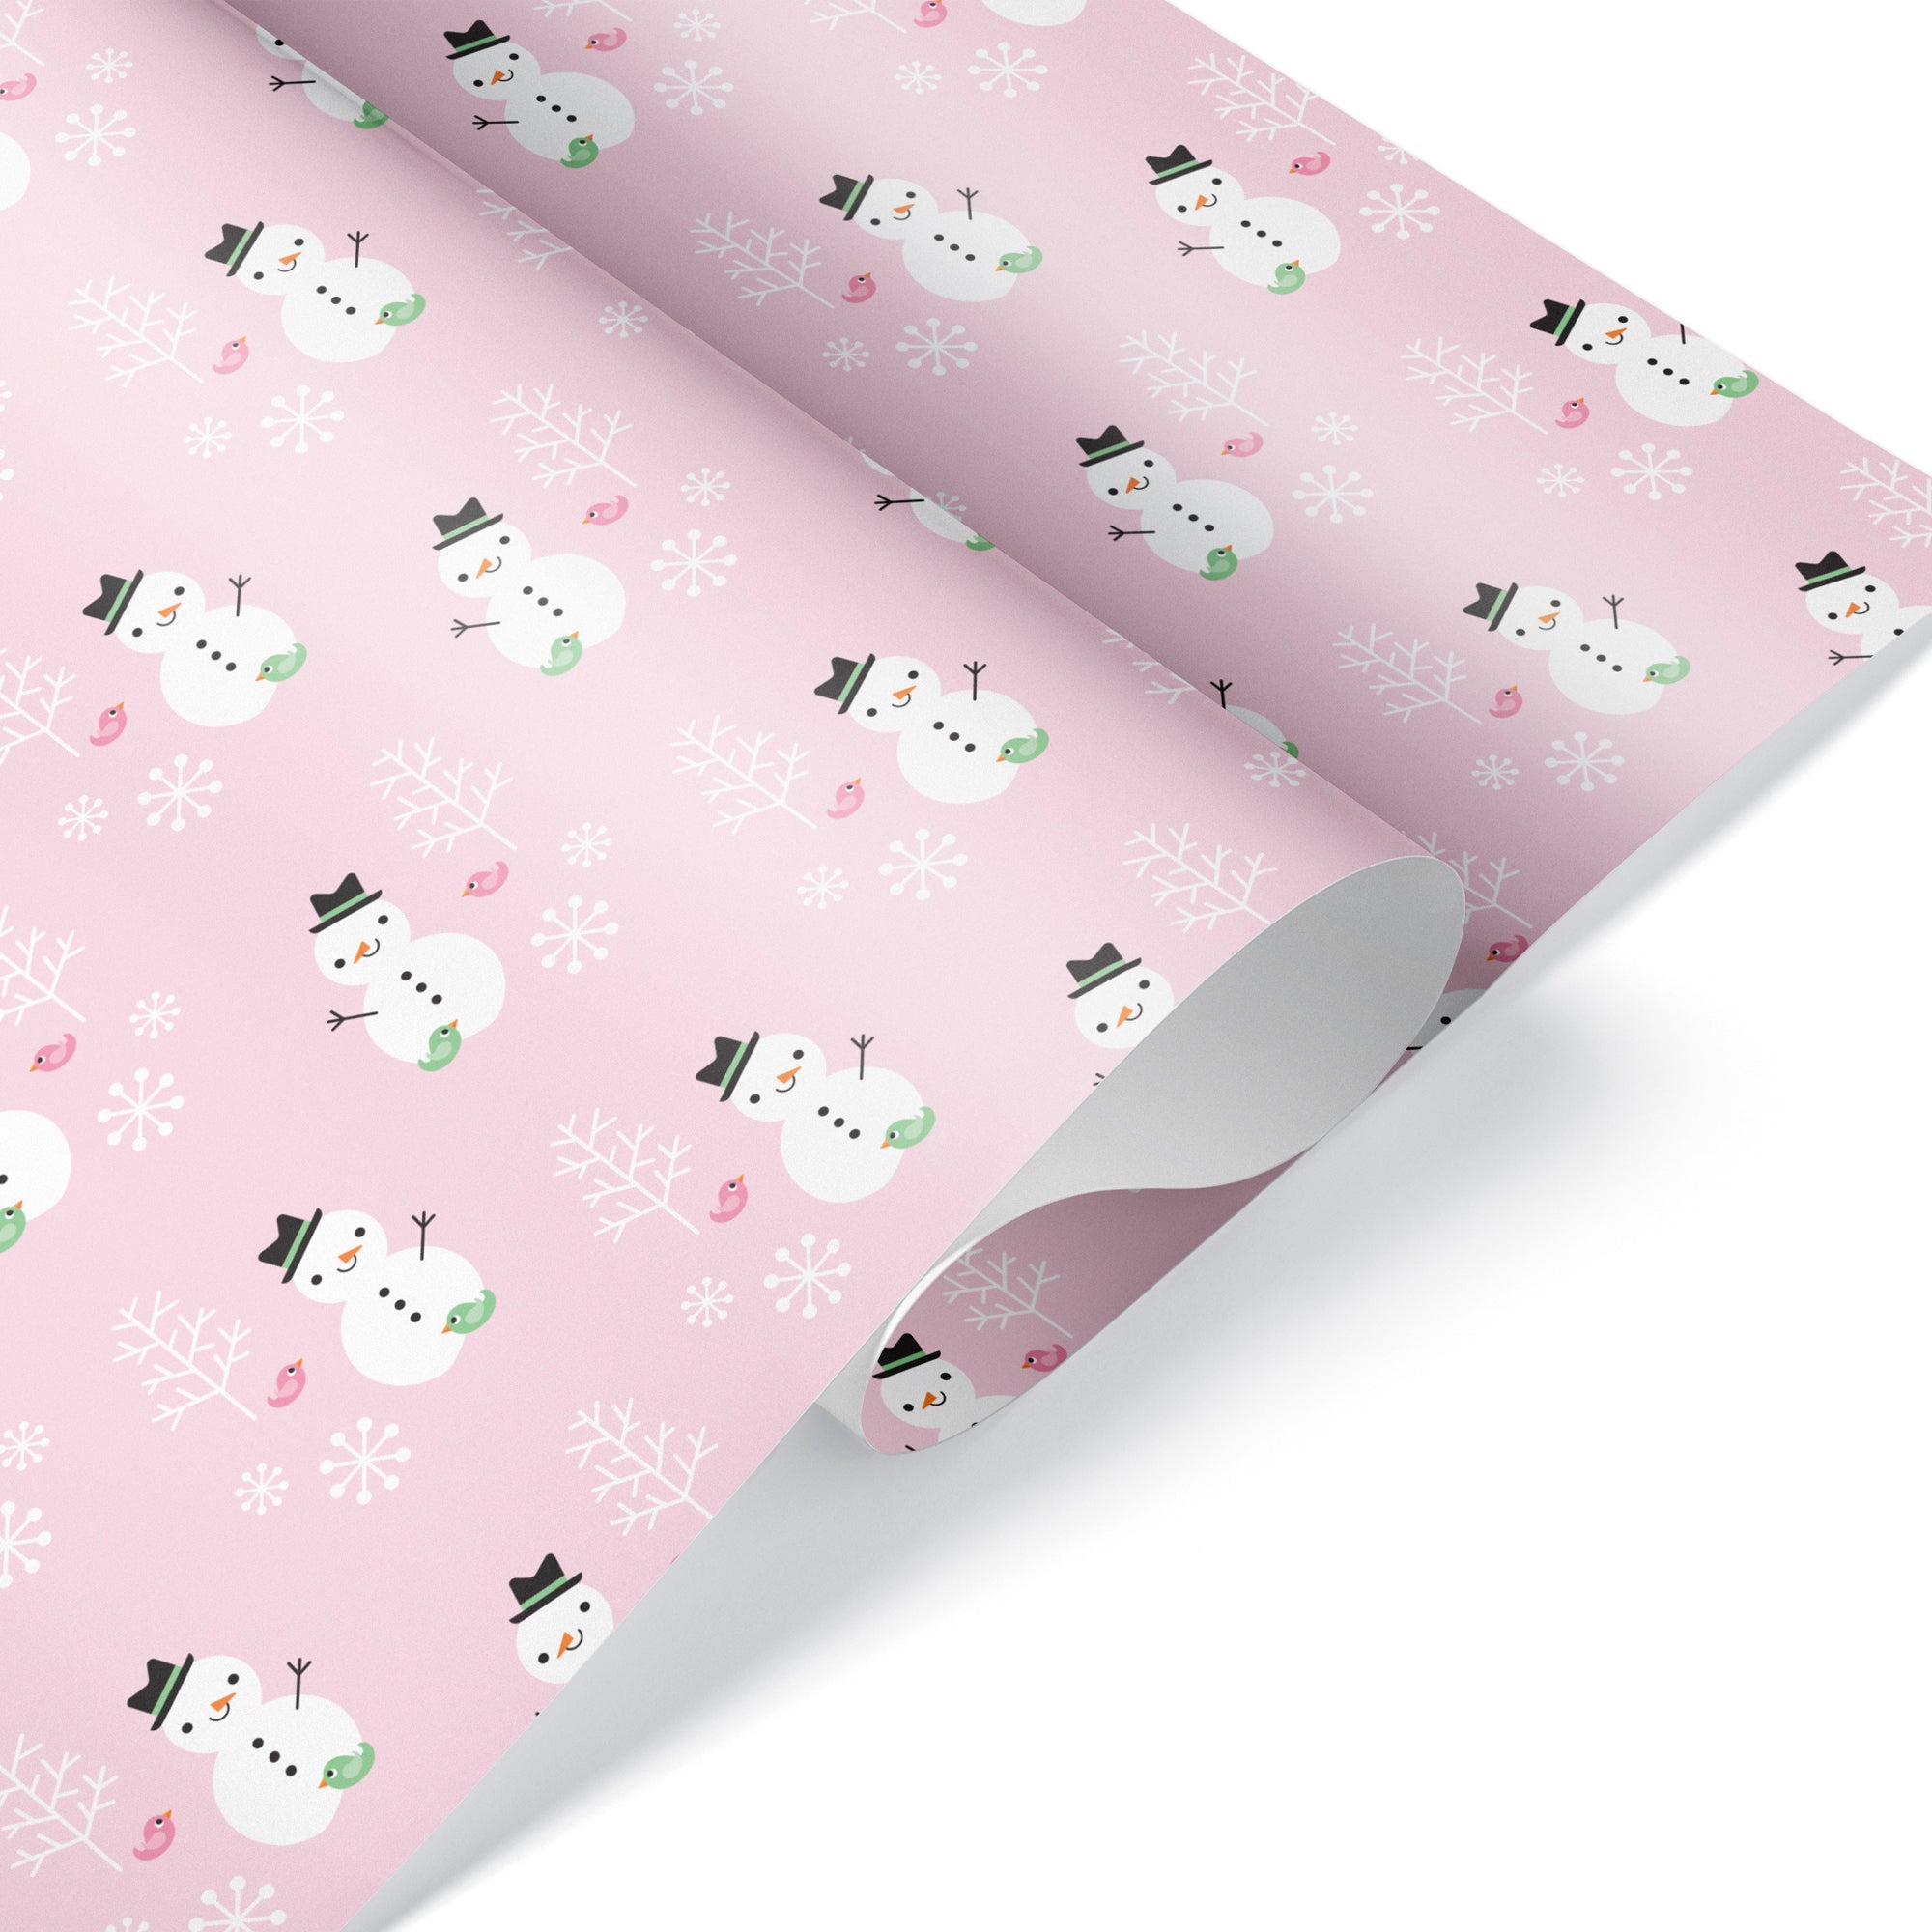 Woodland Flowers Wrapping Paper, Gift Wrap, Birthday Wrapping Paper,  Wrapping Paper Roll, Wrapping Paper For, Pretty Wrapping Wrappingpaper 